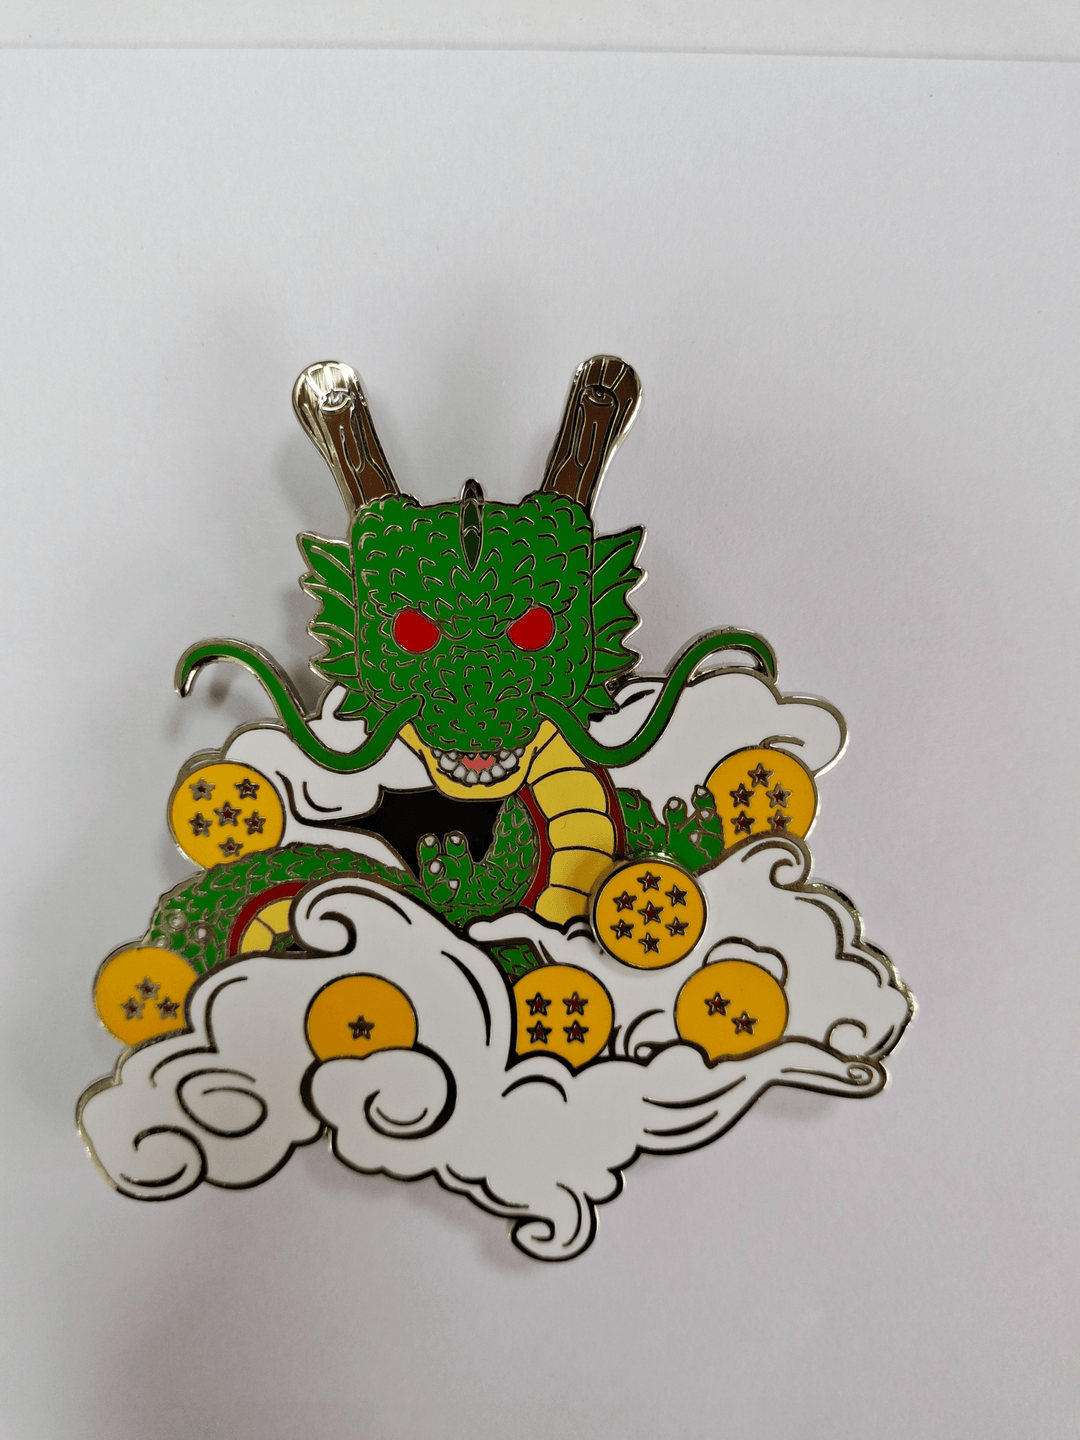 Pop! Pin Animation: Dragon Ball Z - 4" Shenron with Spinning Dragon - Brand My Case